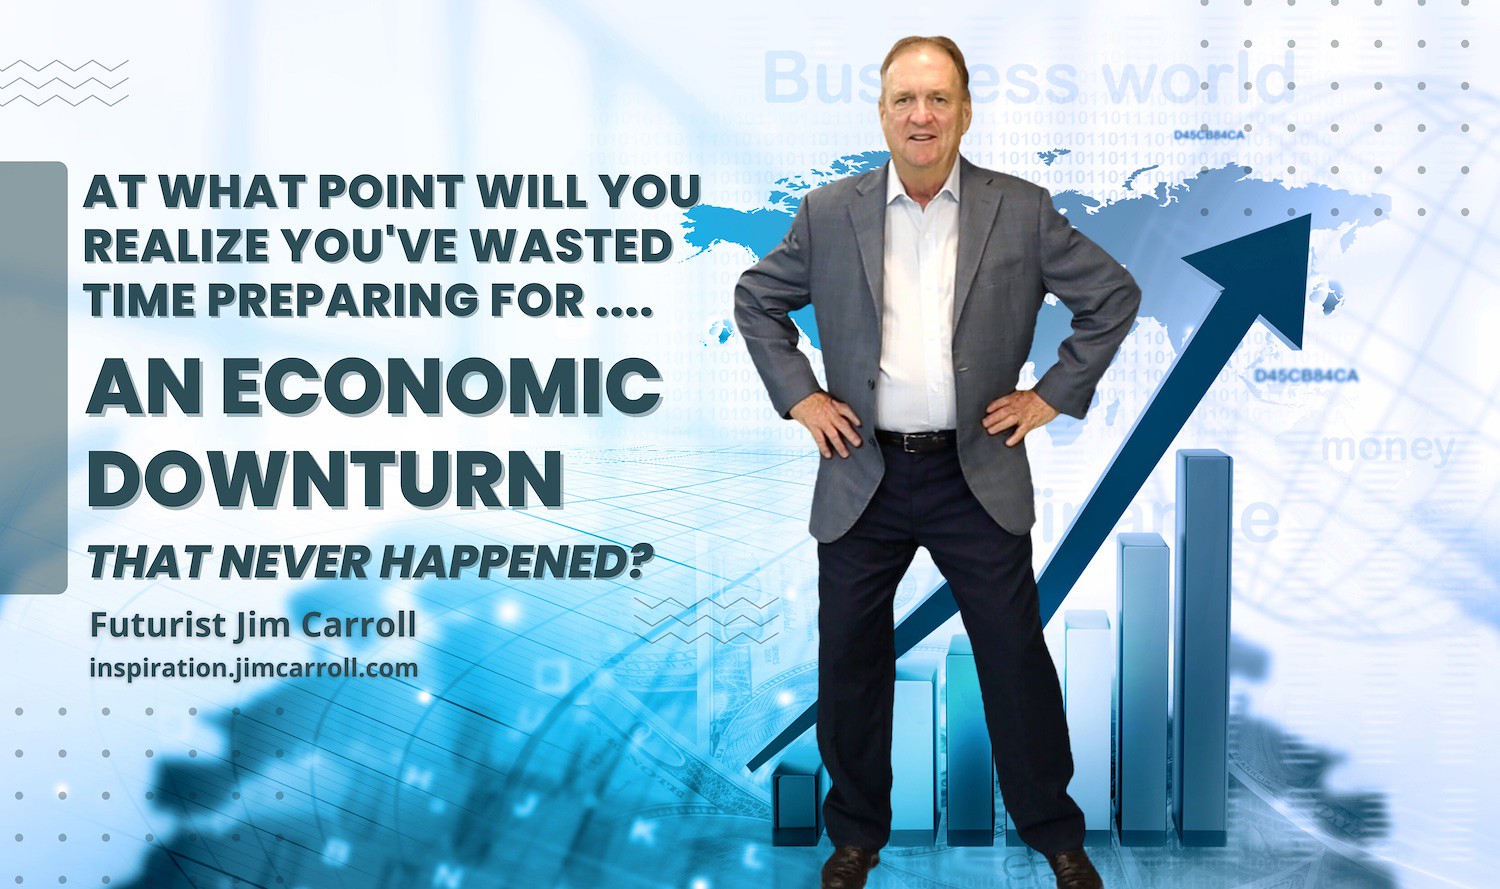 "At what point will you realize you've wasted time preparing for an economic downturn that never happened?" - Futurist Jim Carroll